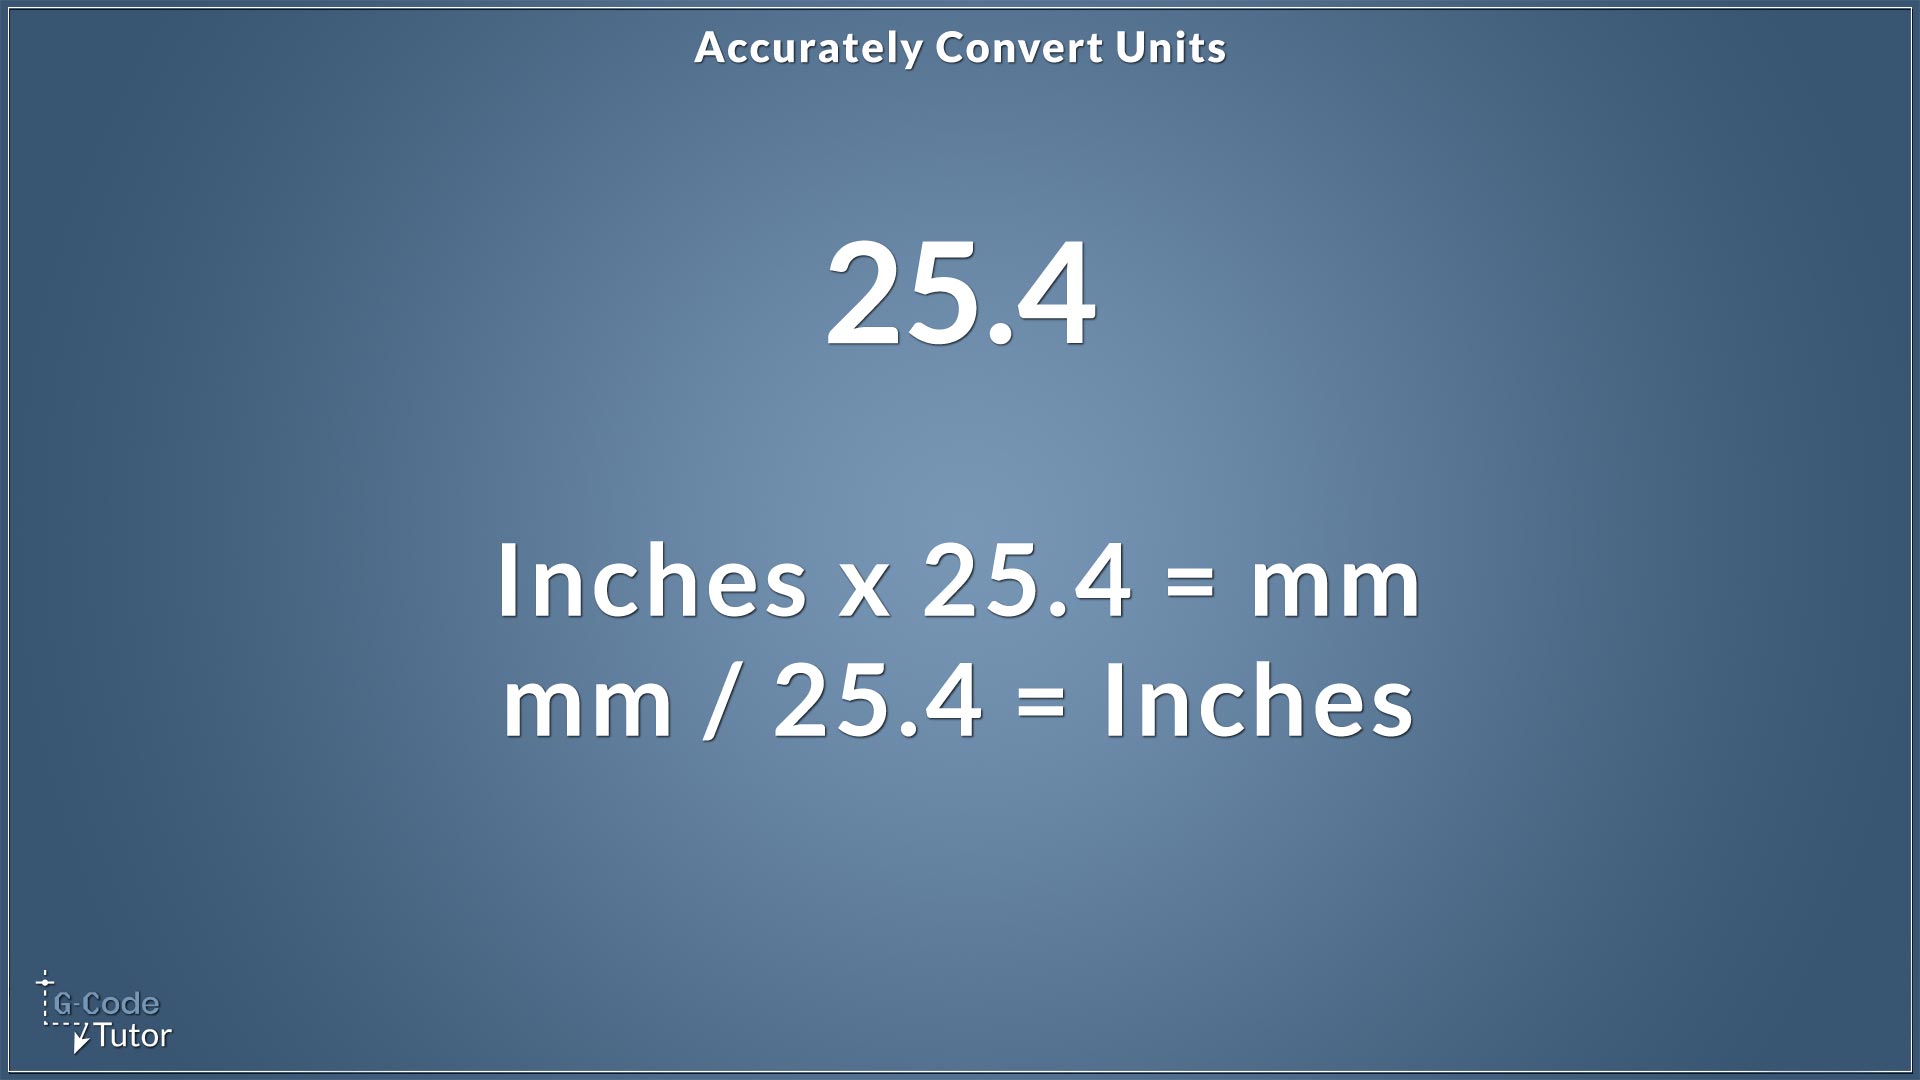 1 inch is equal to 25.4mm